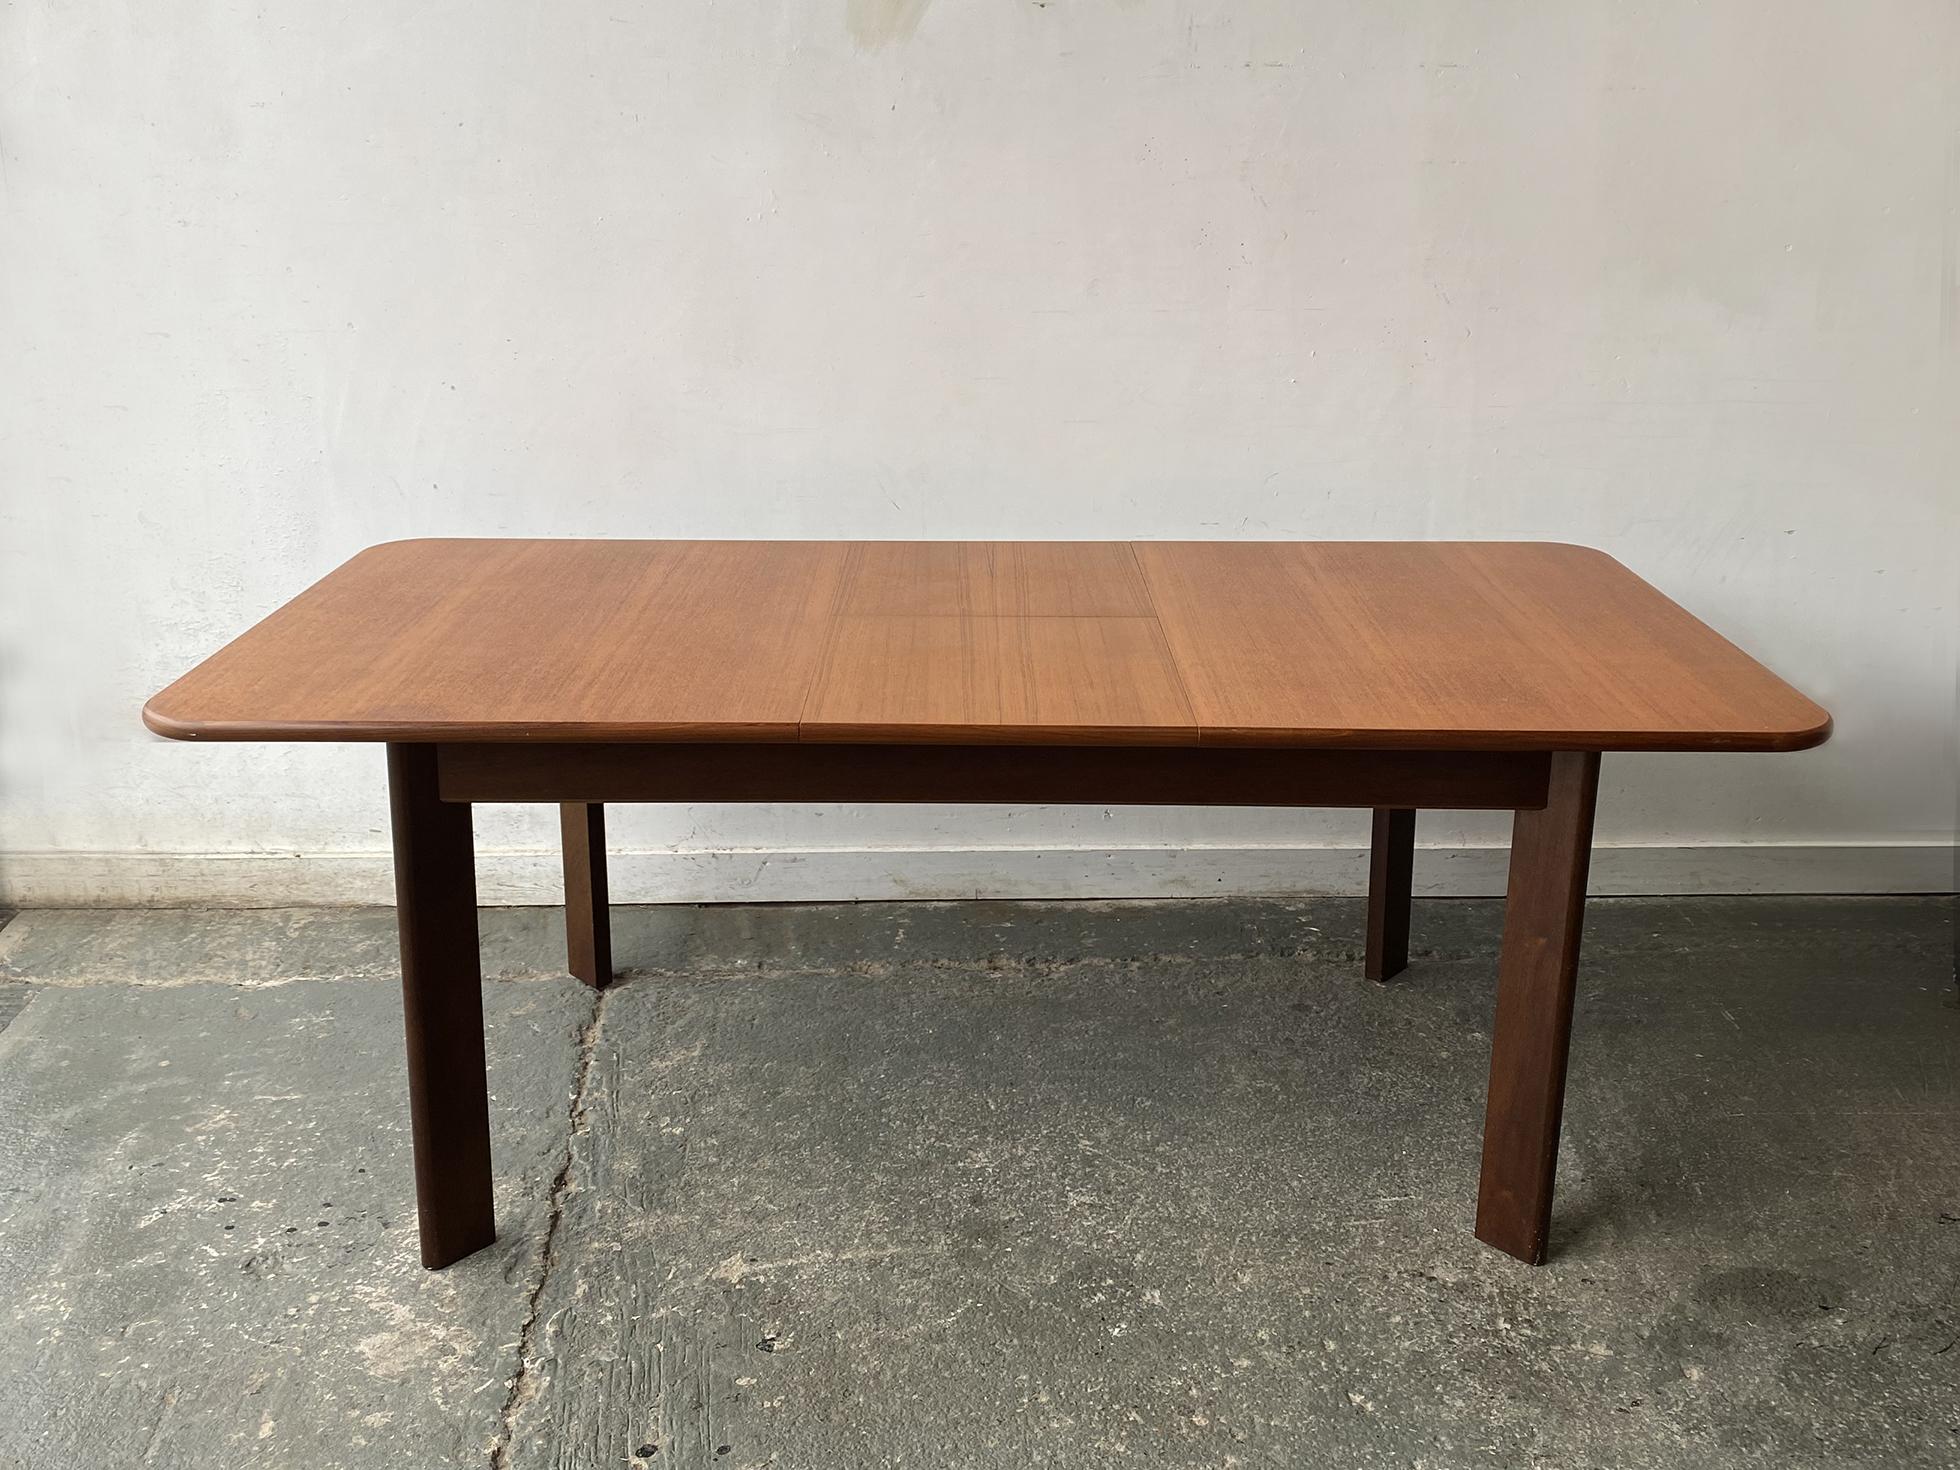 A G plan extending dining table, with a design that is not typical  of the G Plan style.
G Plan collaborated with Danish designers including Kofod Larsen, and this was probably the design of this table originated.

It is a substantial table, with